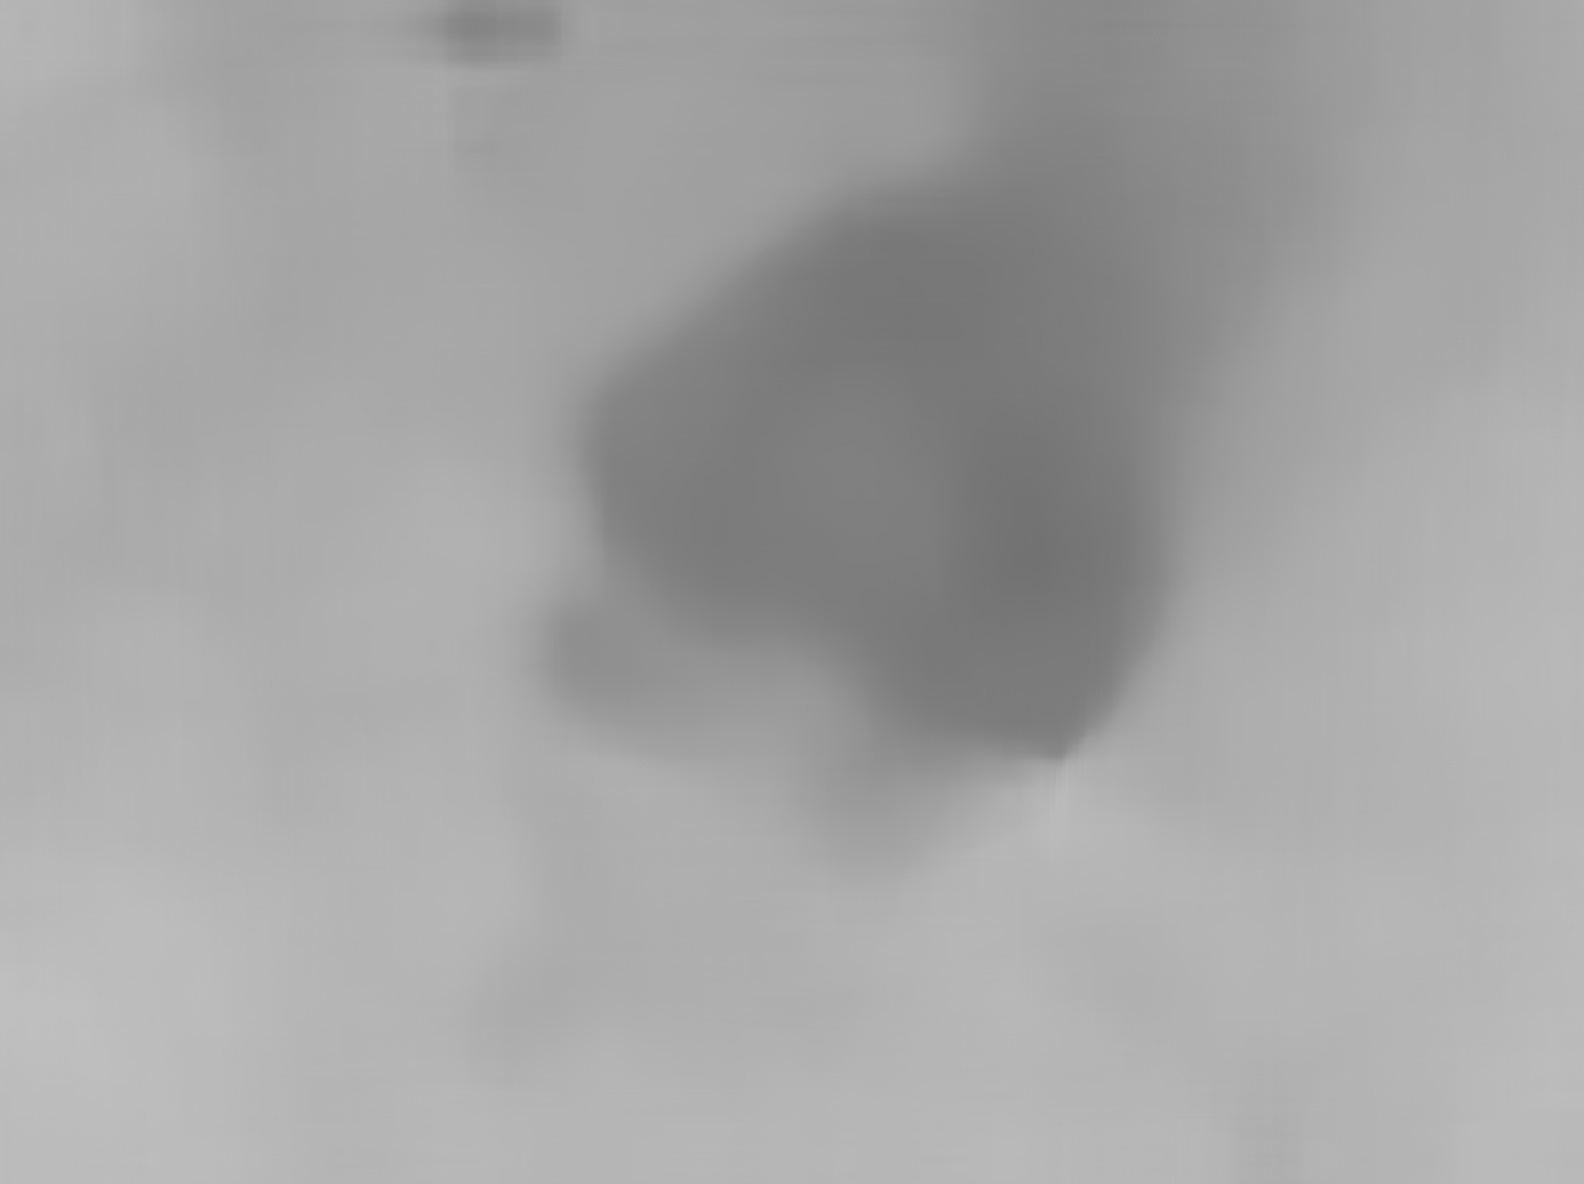 Nasa's Mars rover Curiosity acquired this image using its Mars Hand Lens Imager (MAHLI) on Sol 1577